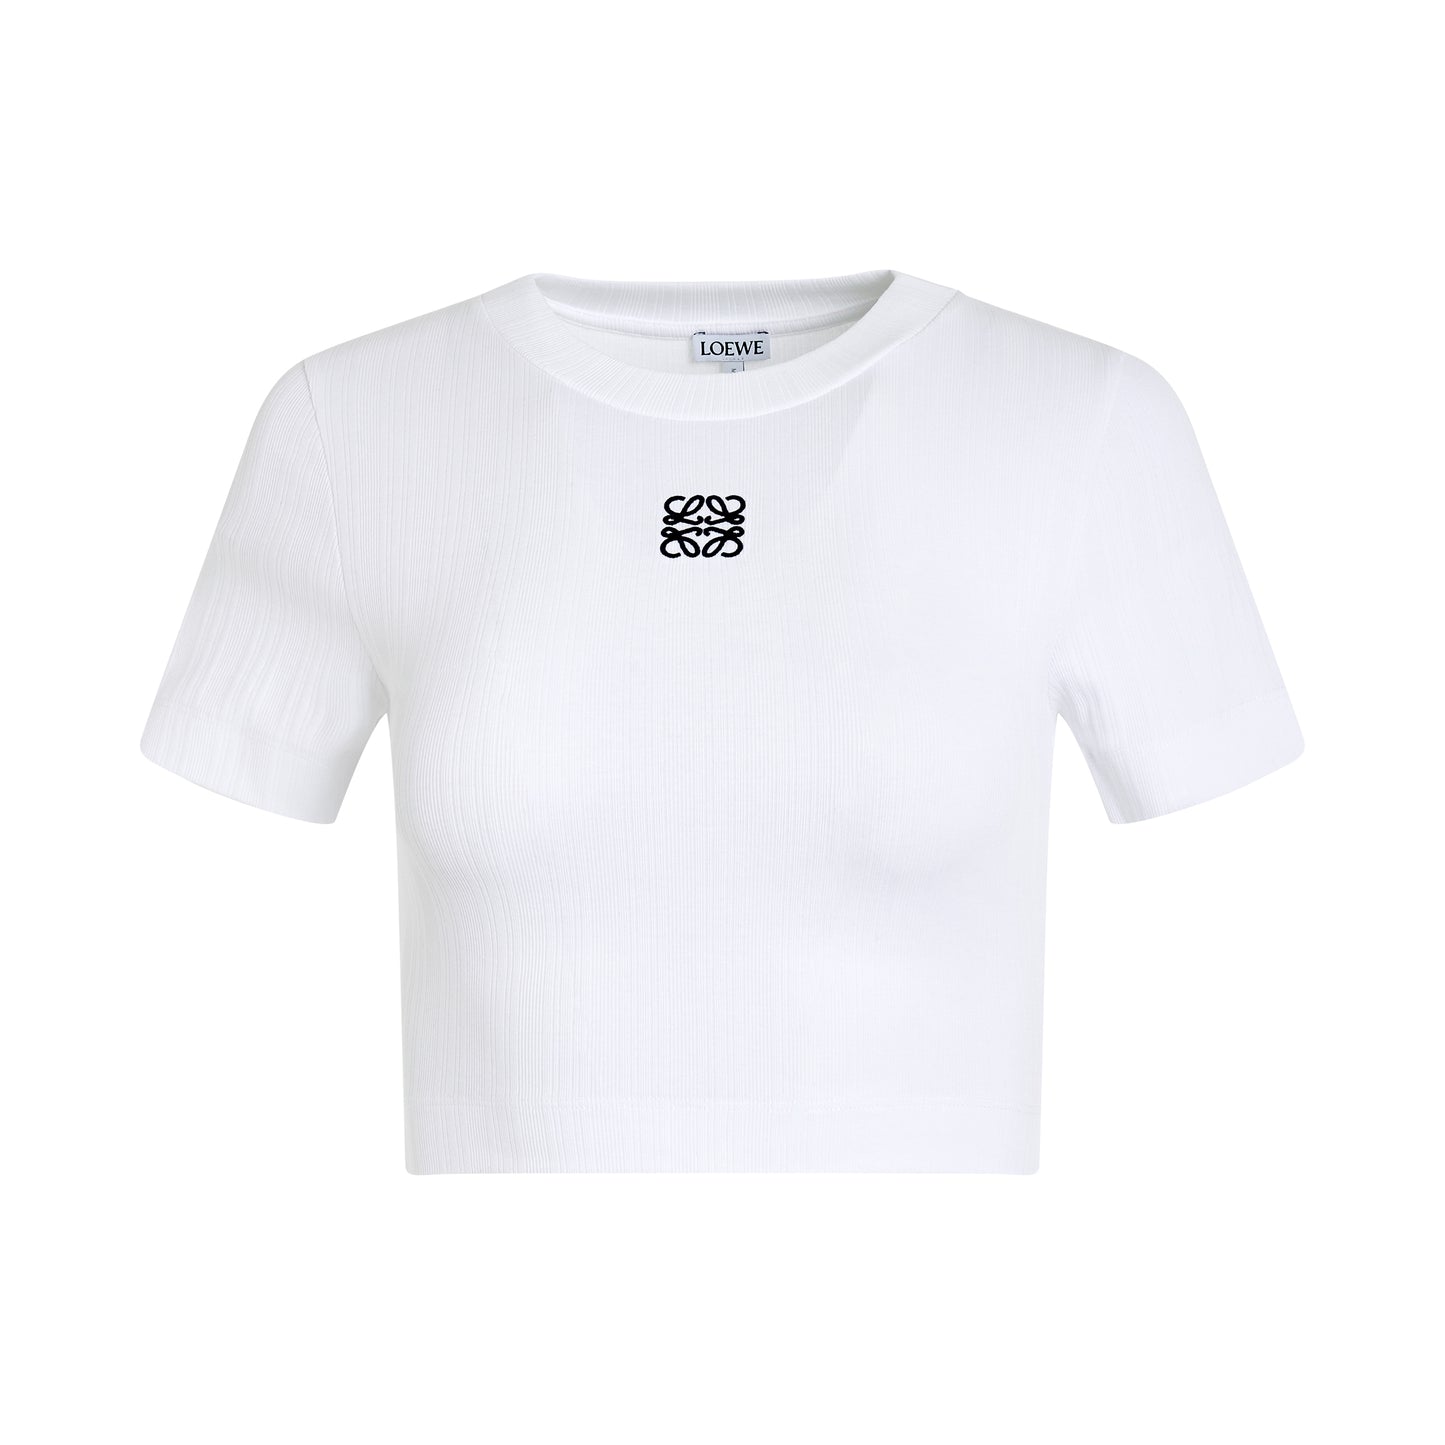 Cropped Anagram Top in White